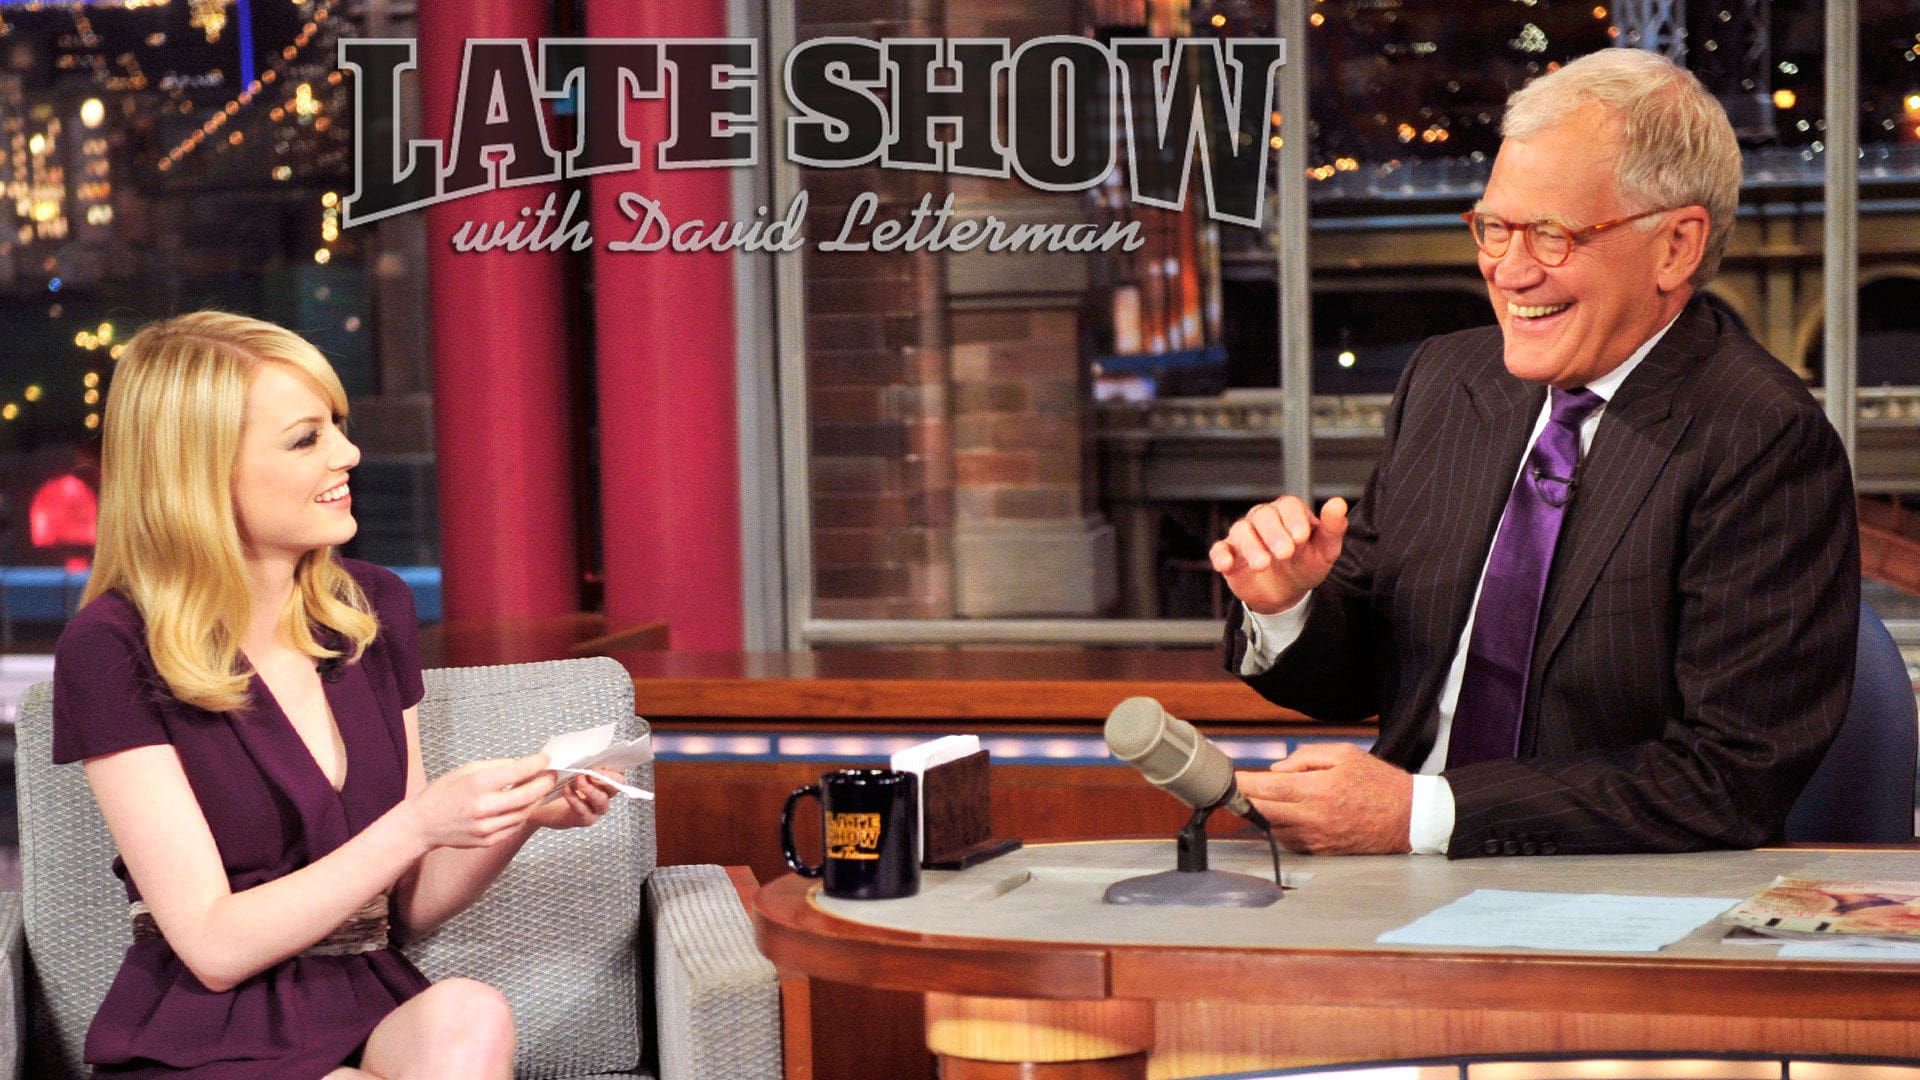 Late Show with David Letterman - Season 22 Episode 120